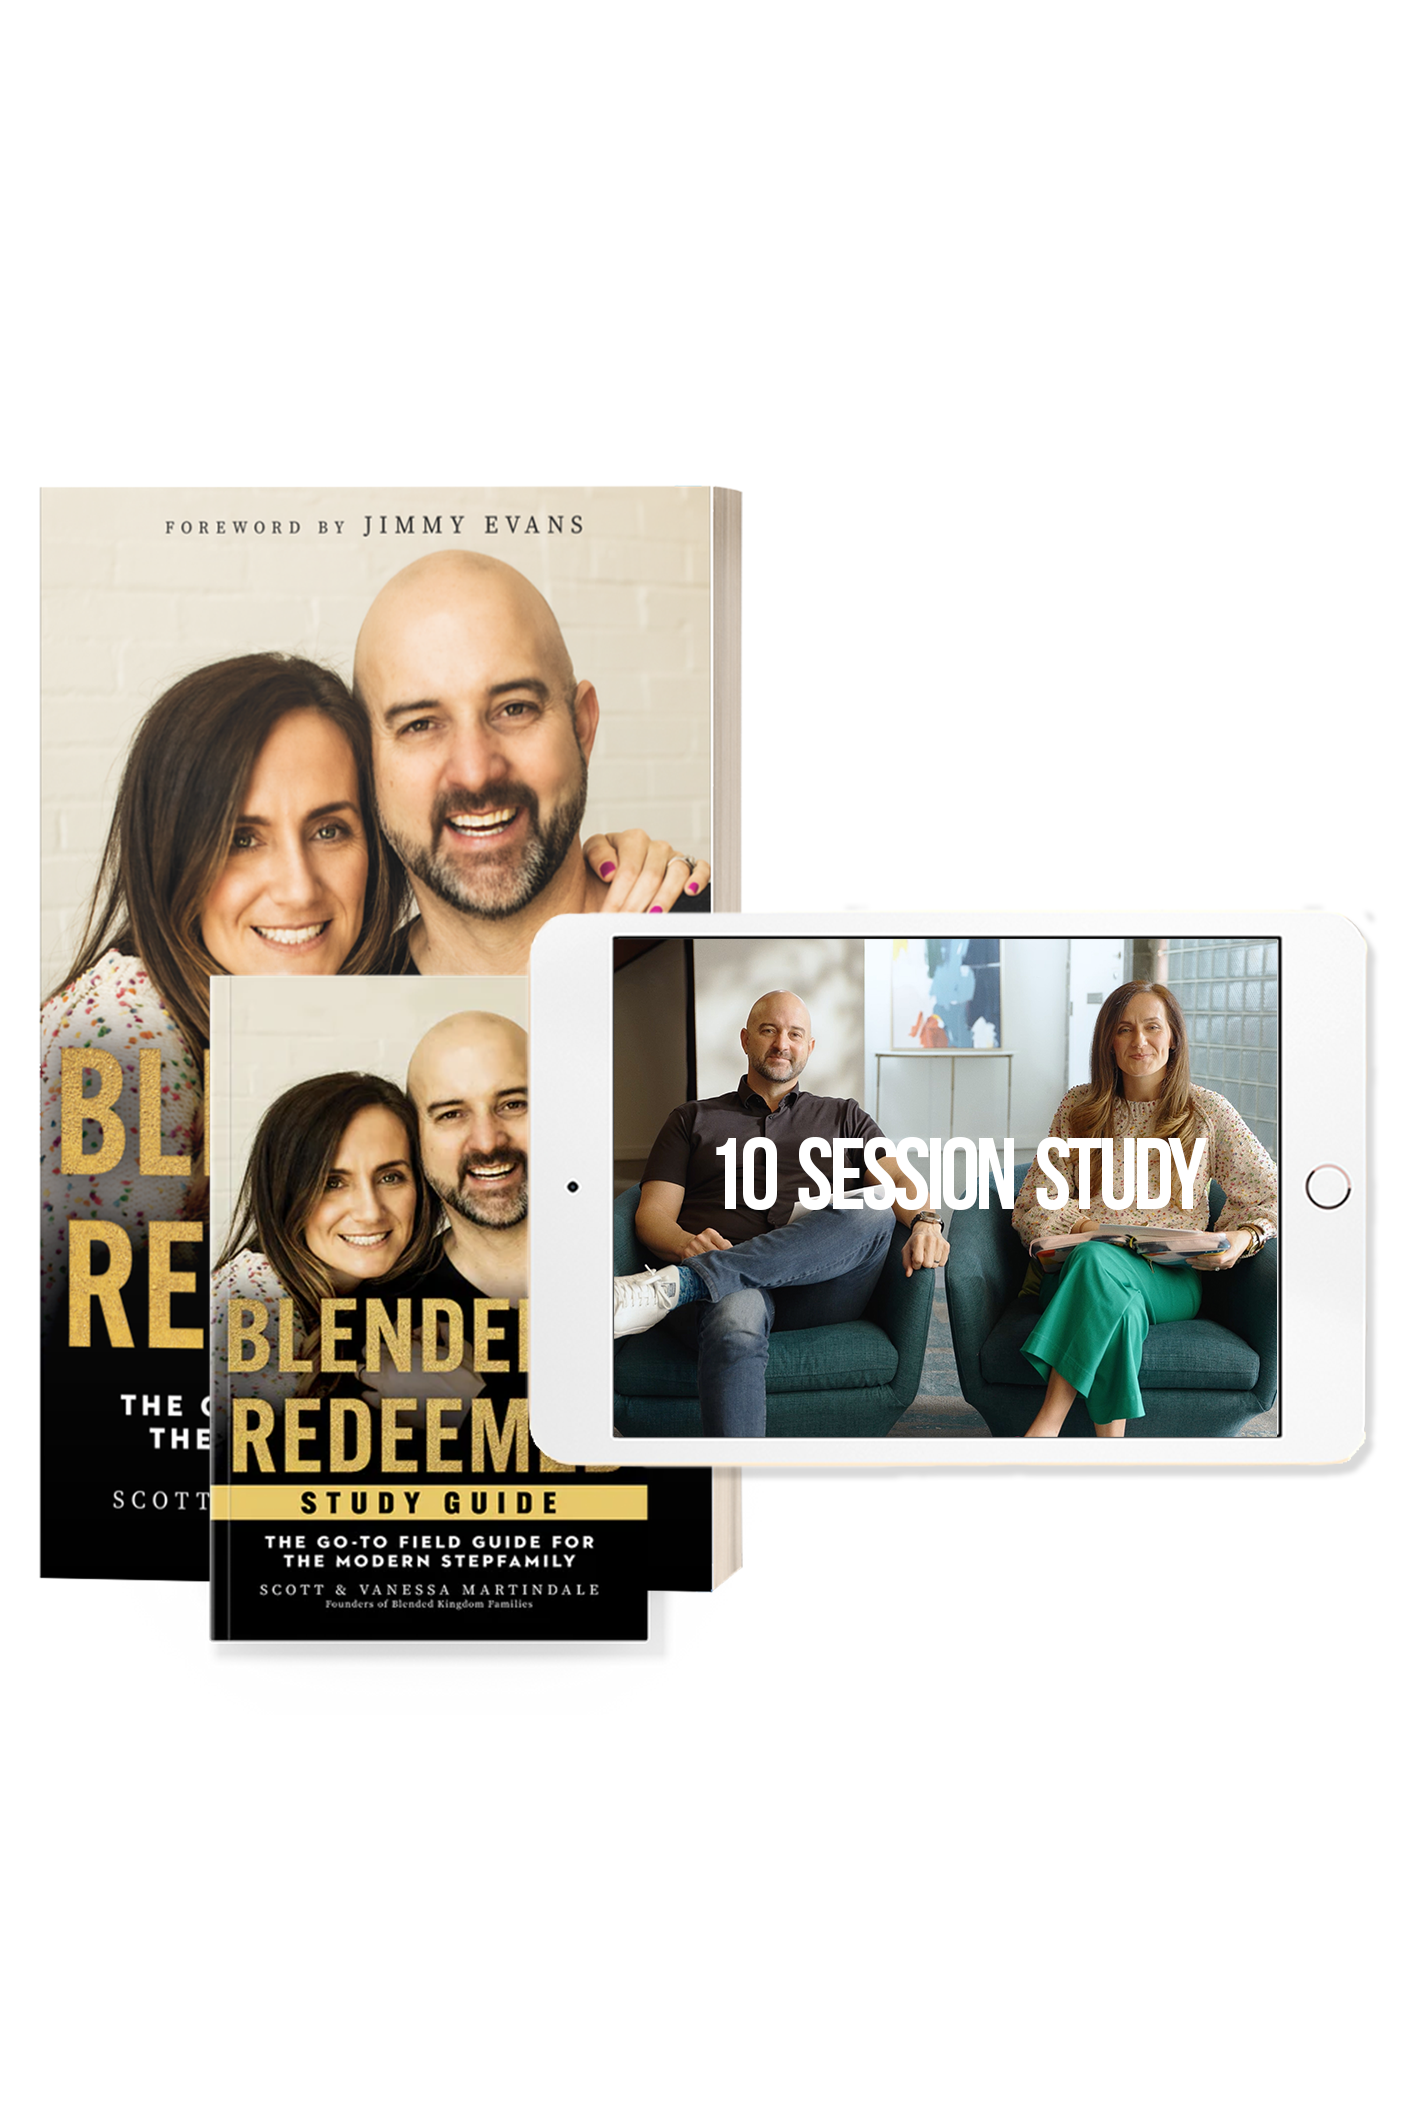 Blended & Redeemed Book, Study Guide, and Teaching Video Bundle for Groups